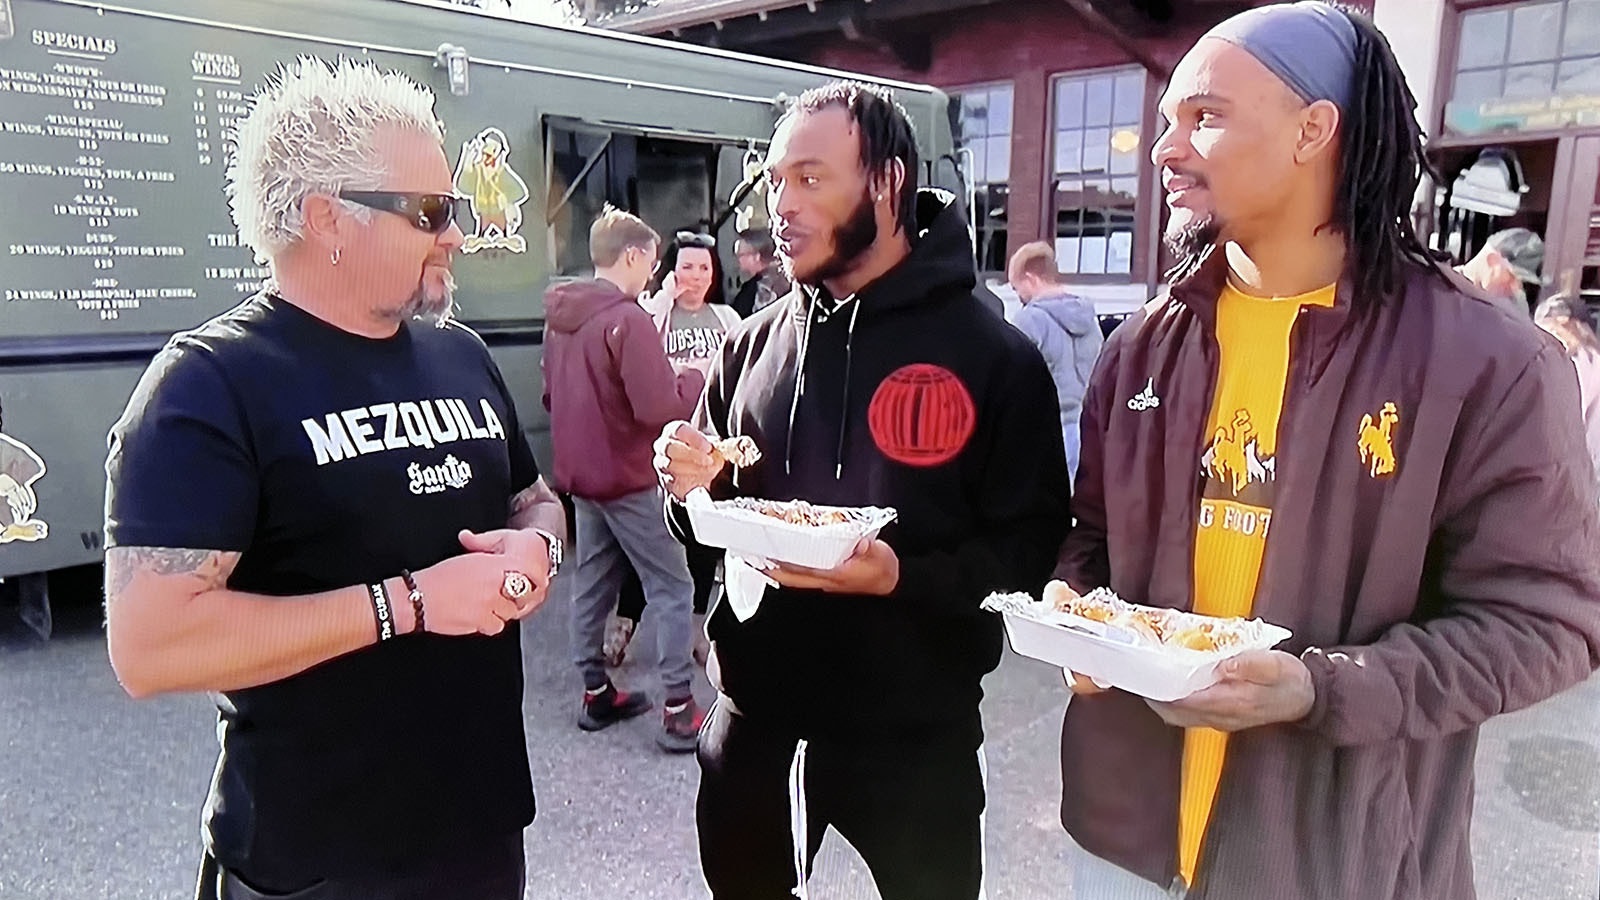 Guy Fieri talks with fans of the Weitzel's Wings food truck in Laramie during a 2021 visit. Fieri filmed segments for six of his "Diners, Drive-Ins and Dives" show during that visit.